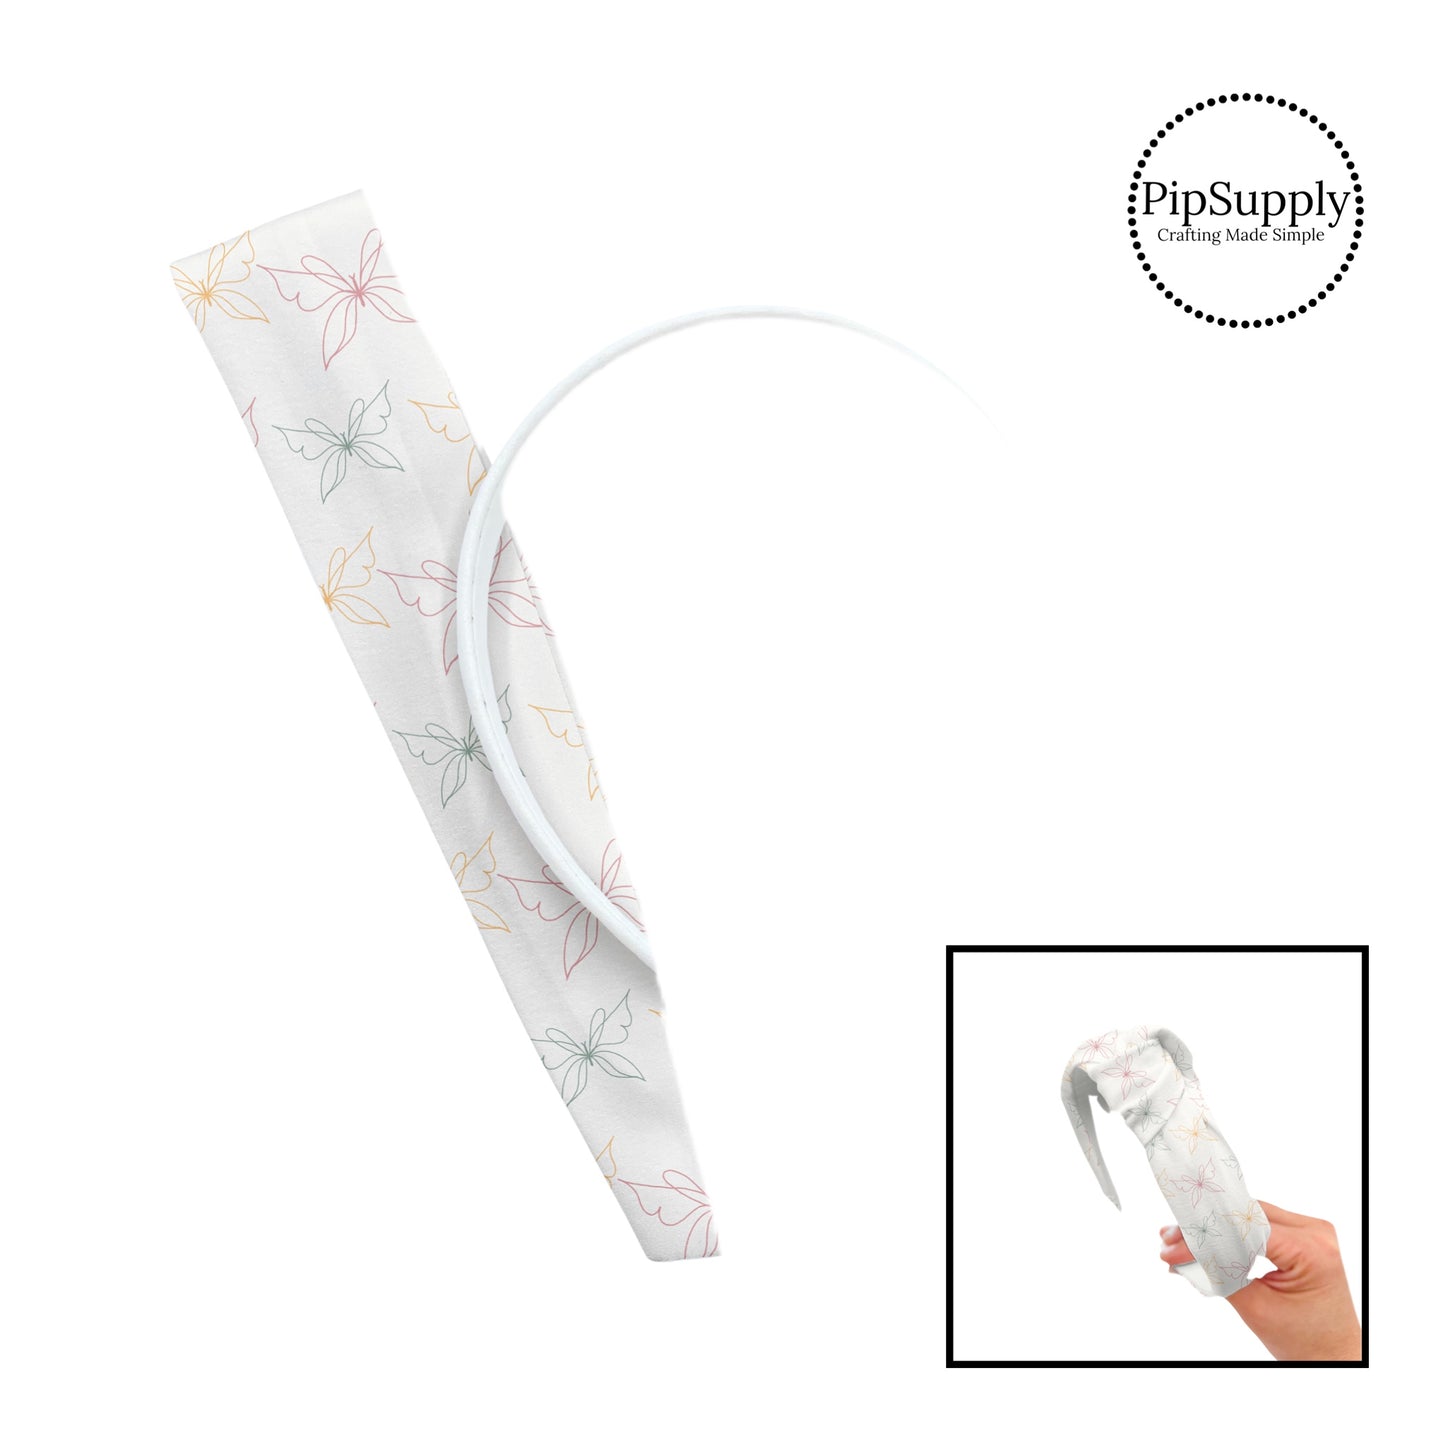 These spring patterned headband kits are easy to assemble and come with everything you need to make your own knotted headband. These kits include a custom printed and sewn fabric strip and a coordinating velvet headband. This cute pattern features colorful outlines of butterflies on cream.